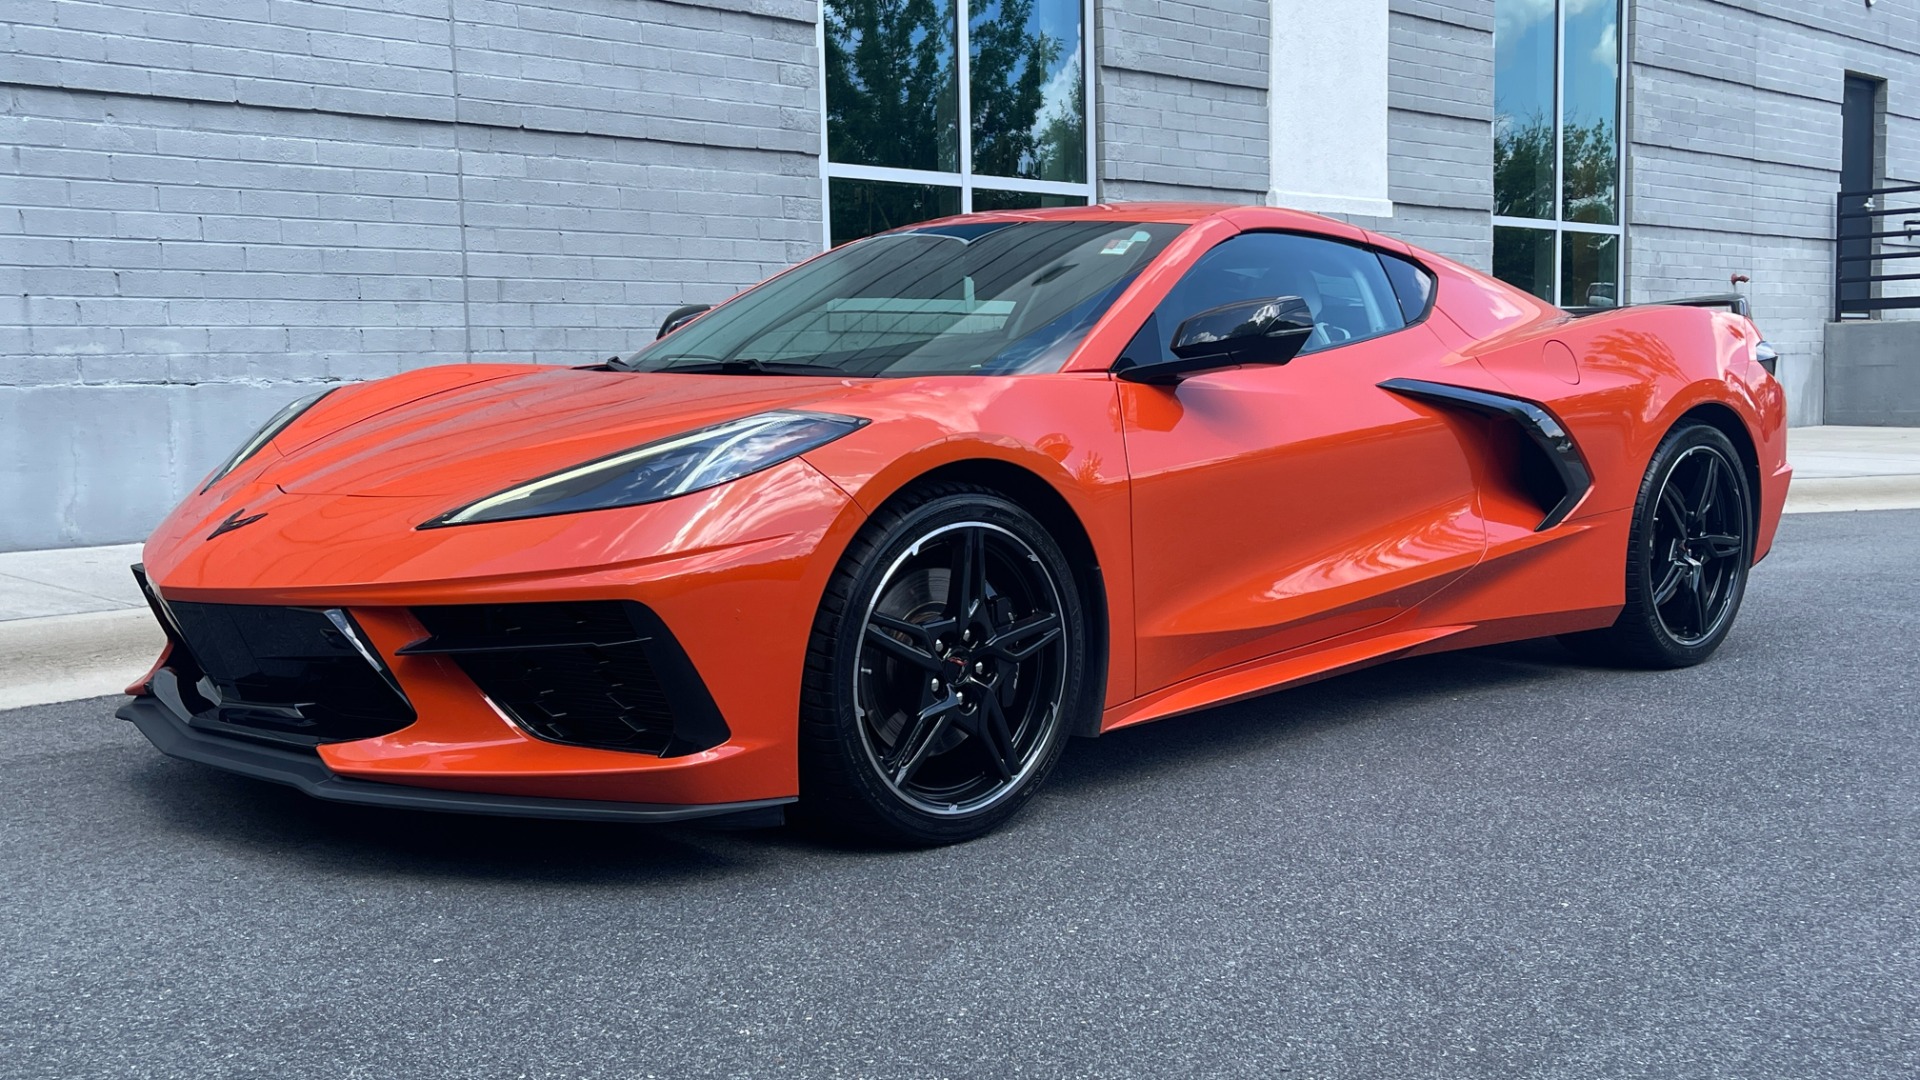 Used 2020 Chevrolet Corvette 3LT / Z51 / PERFORMANCE EXHAUST / FRONT LIFT / Z51 BRAKES / CARBON FIBER AC for sale $92,595 at Formula Imports in Charlotte NC 28227 18